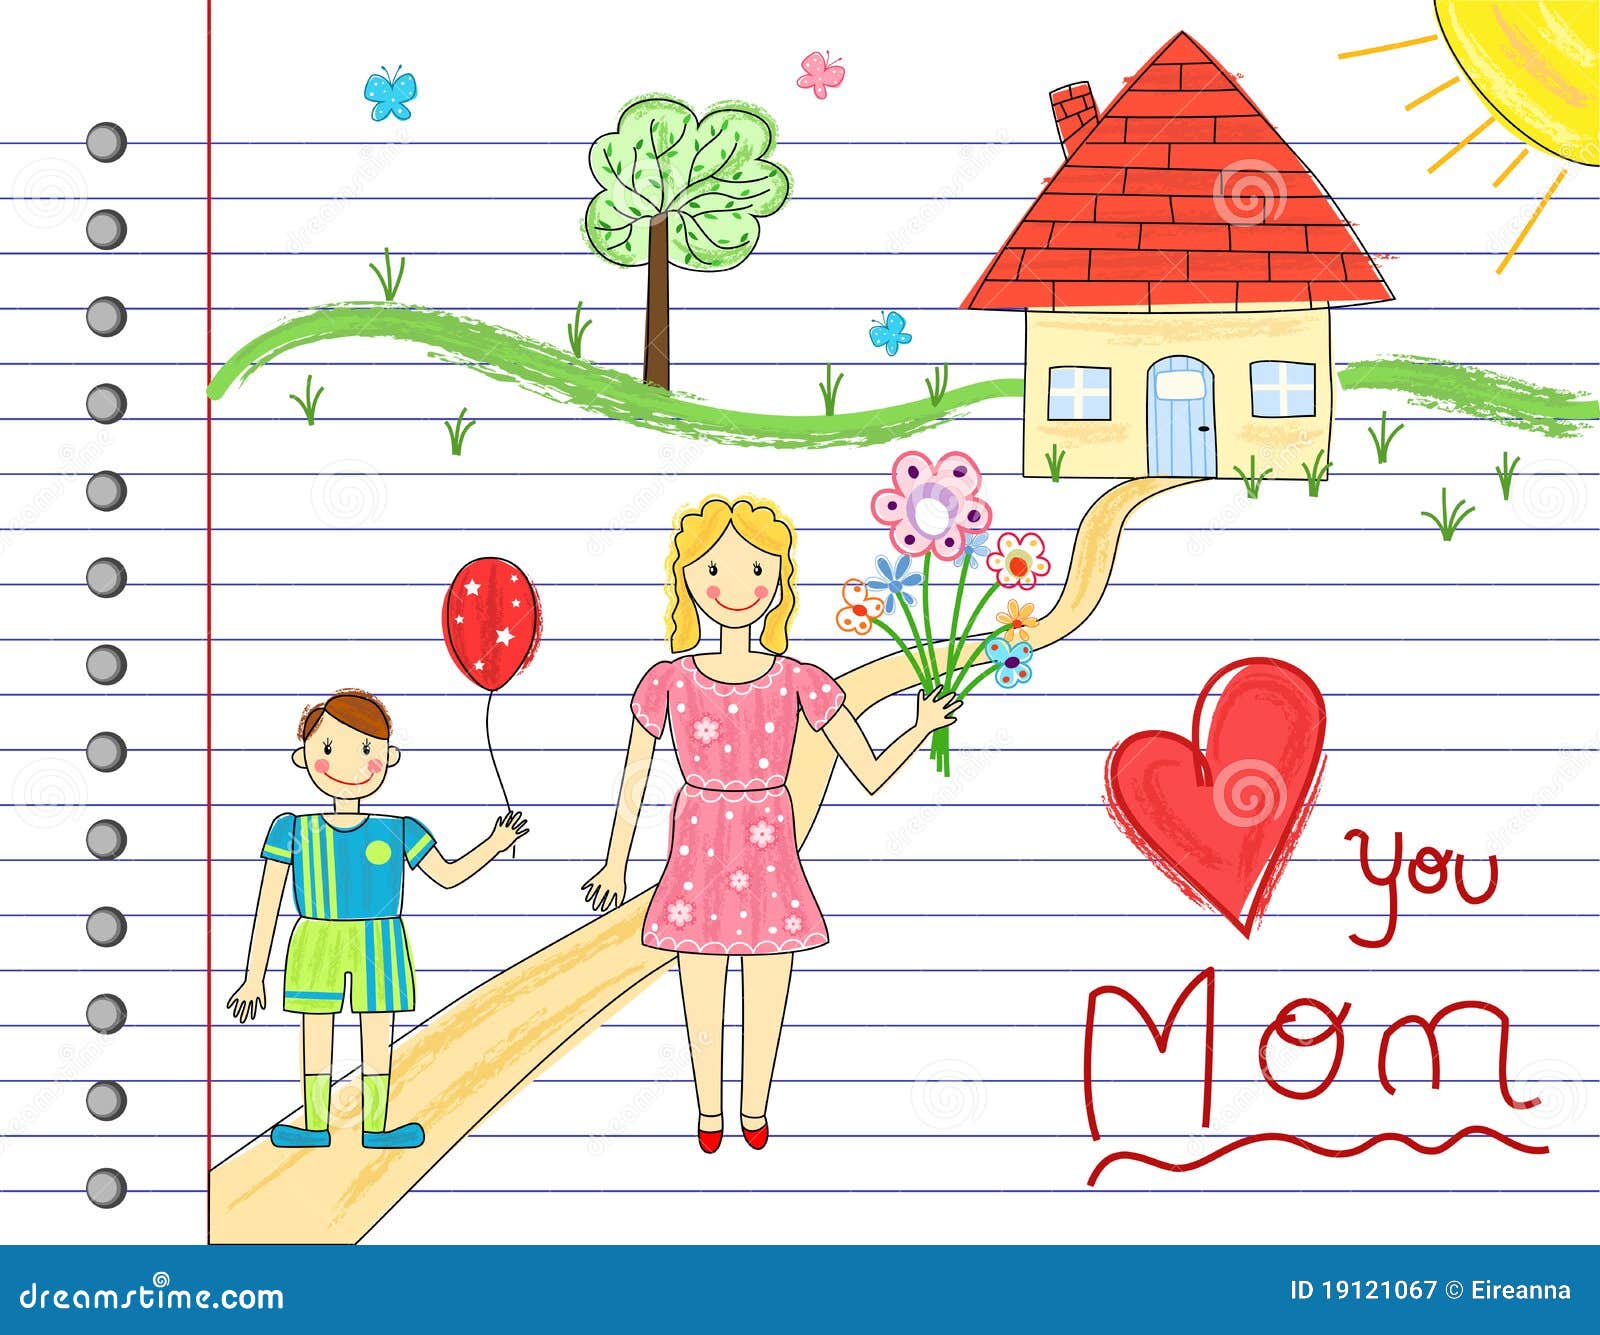 Mothers day drawing competition | A Mothers day drawing comp… | Flickr-saigonsouth.com.vn